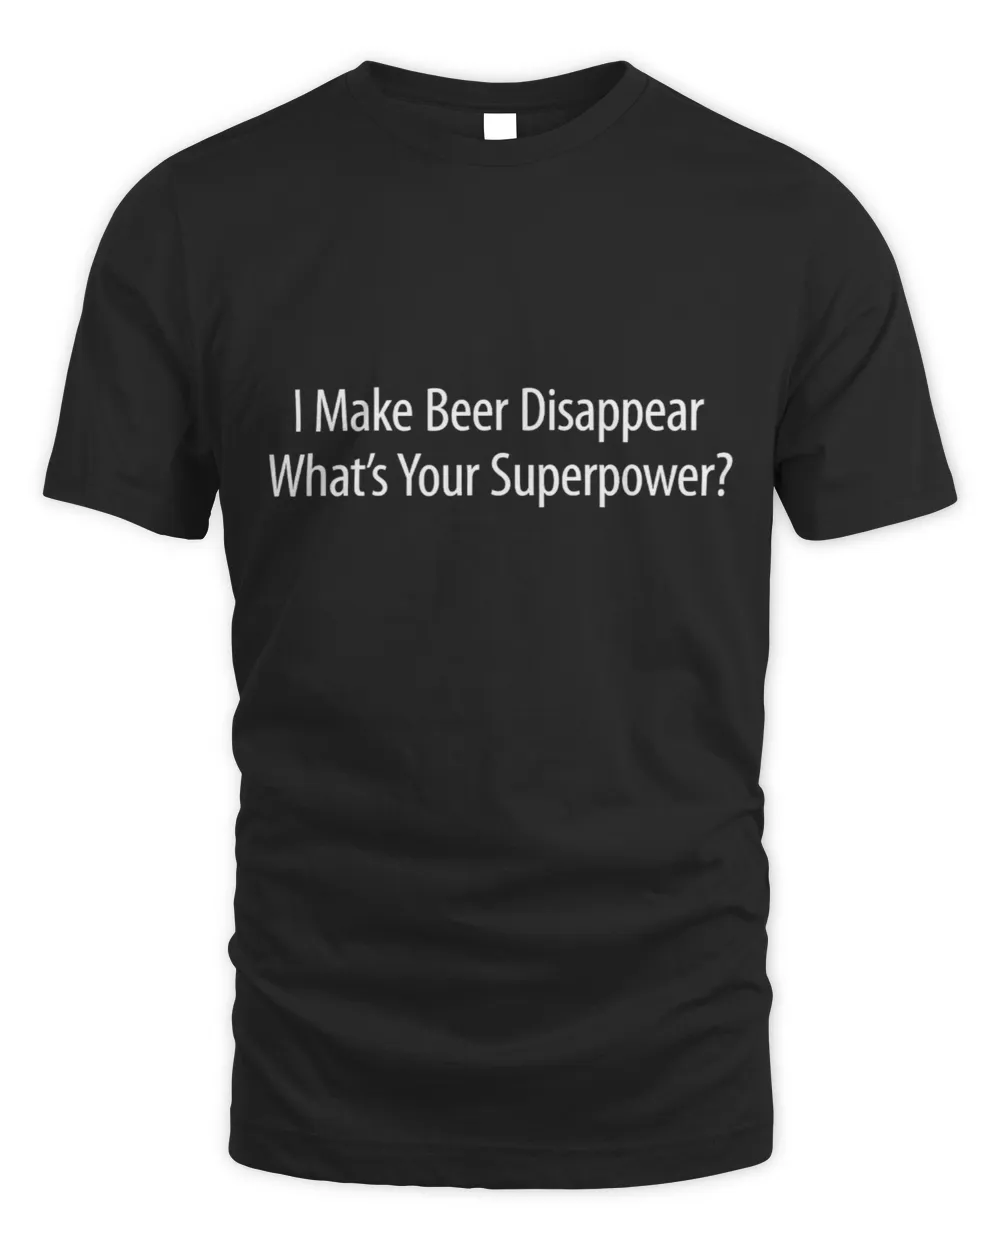 I Make Beer Disappear - What's Your Superpower - T-Shirt